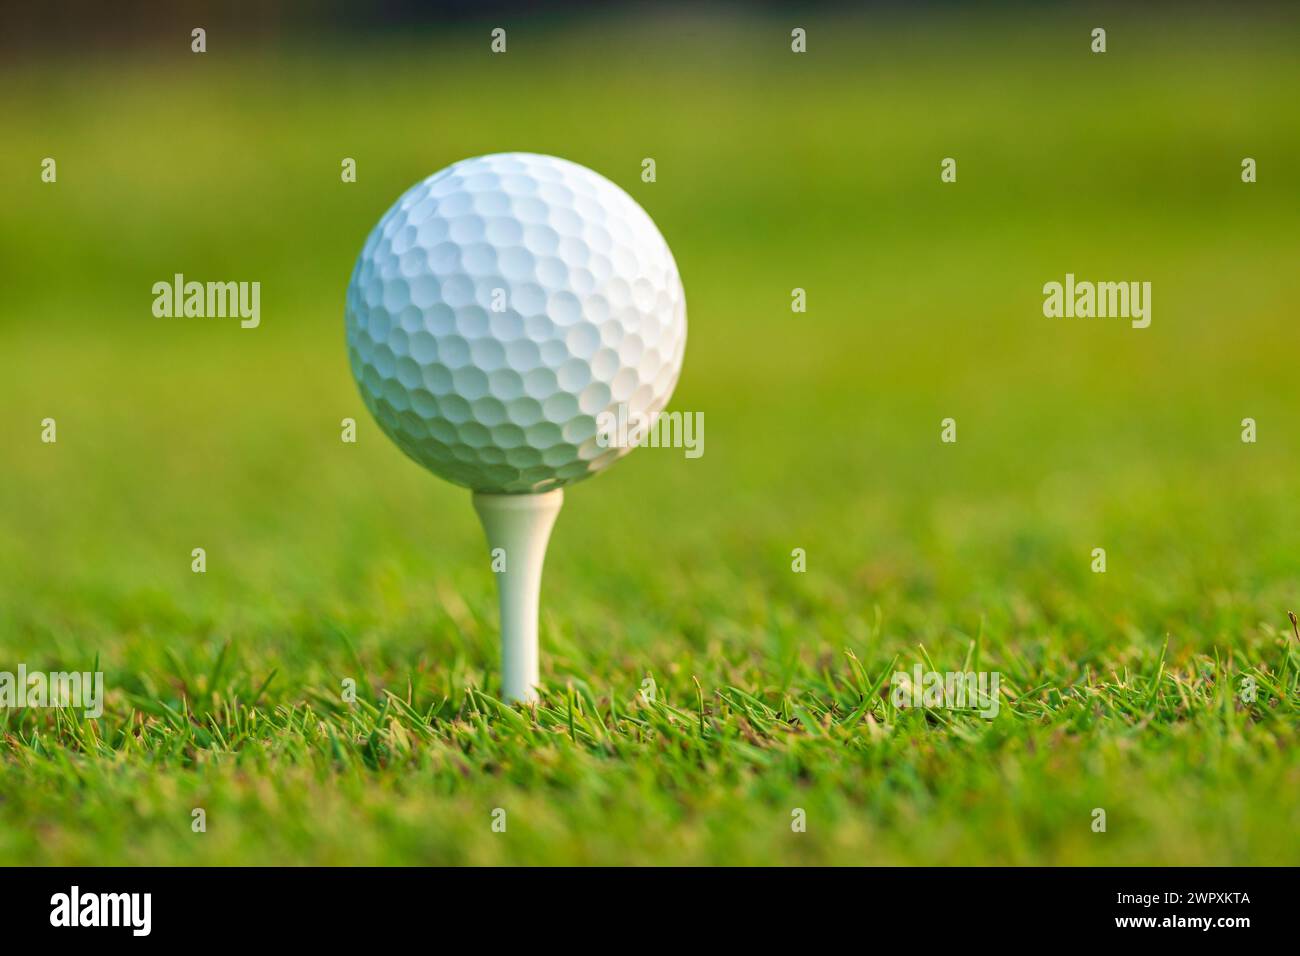 Low angle view of a golf ball on a tee in front of defocused background Stock Photo